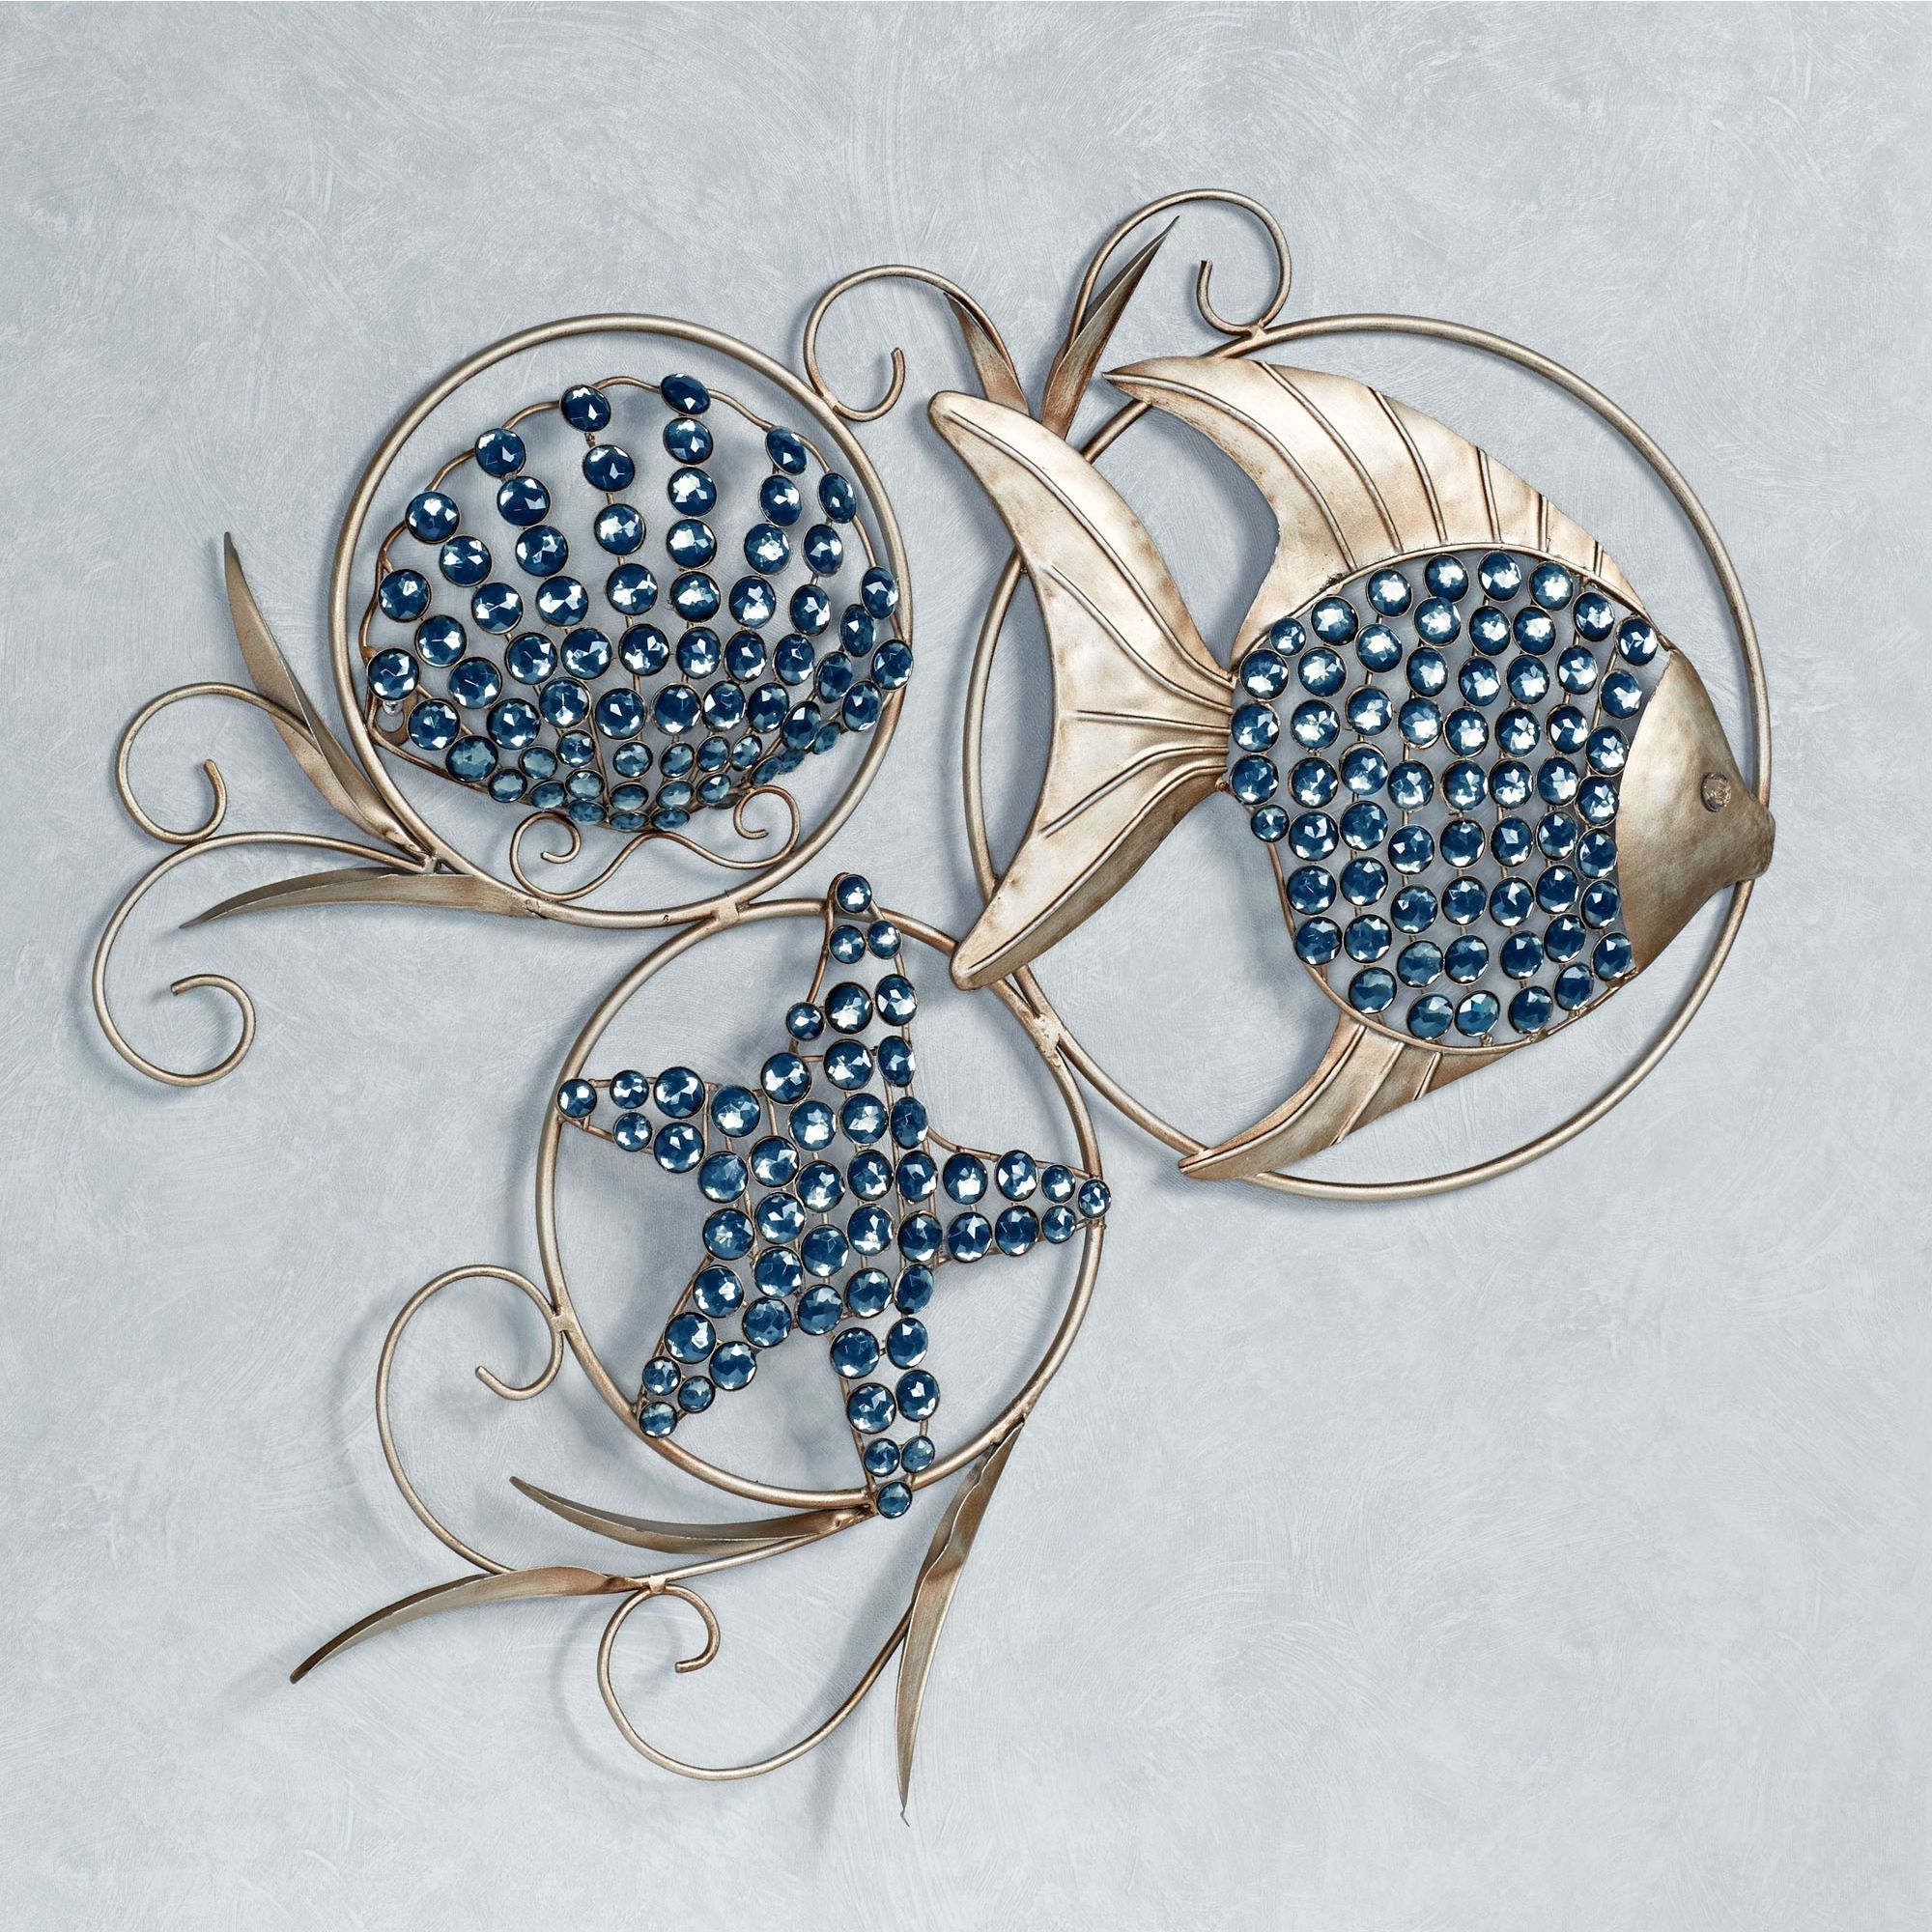 Widely Used Ocean Wall Art Within Ocean Gems Fish And Seashell Metal Wall Art (View 11 of 20)